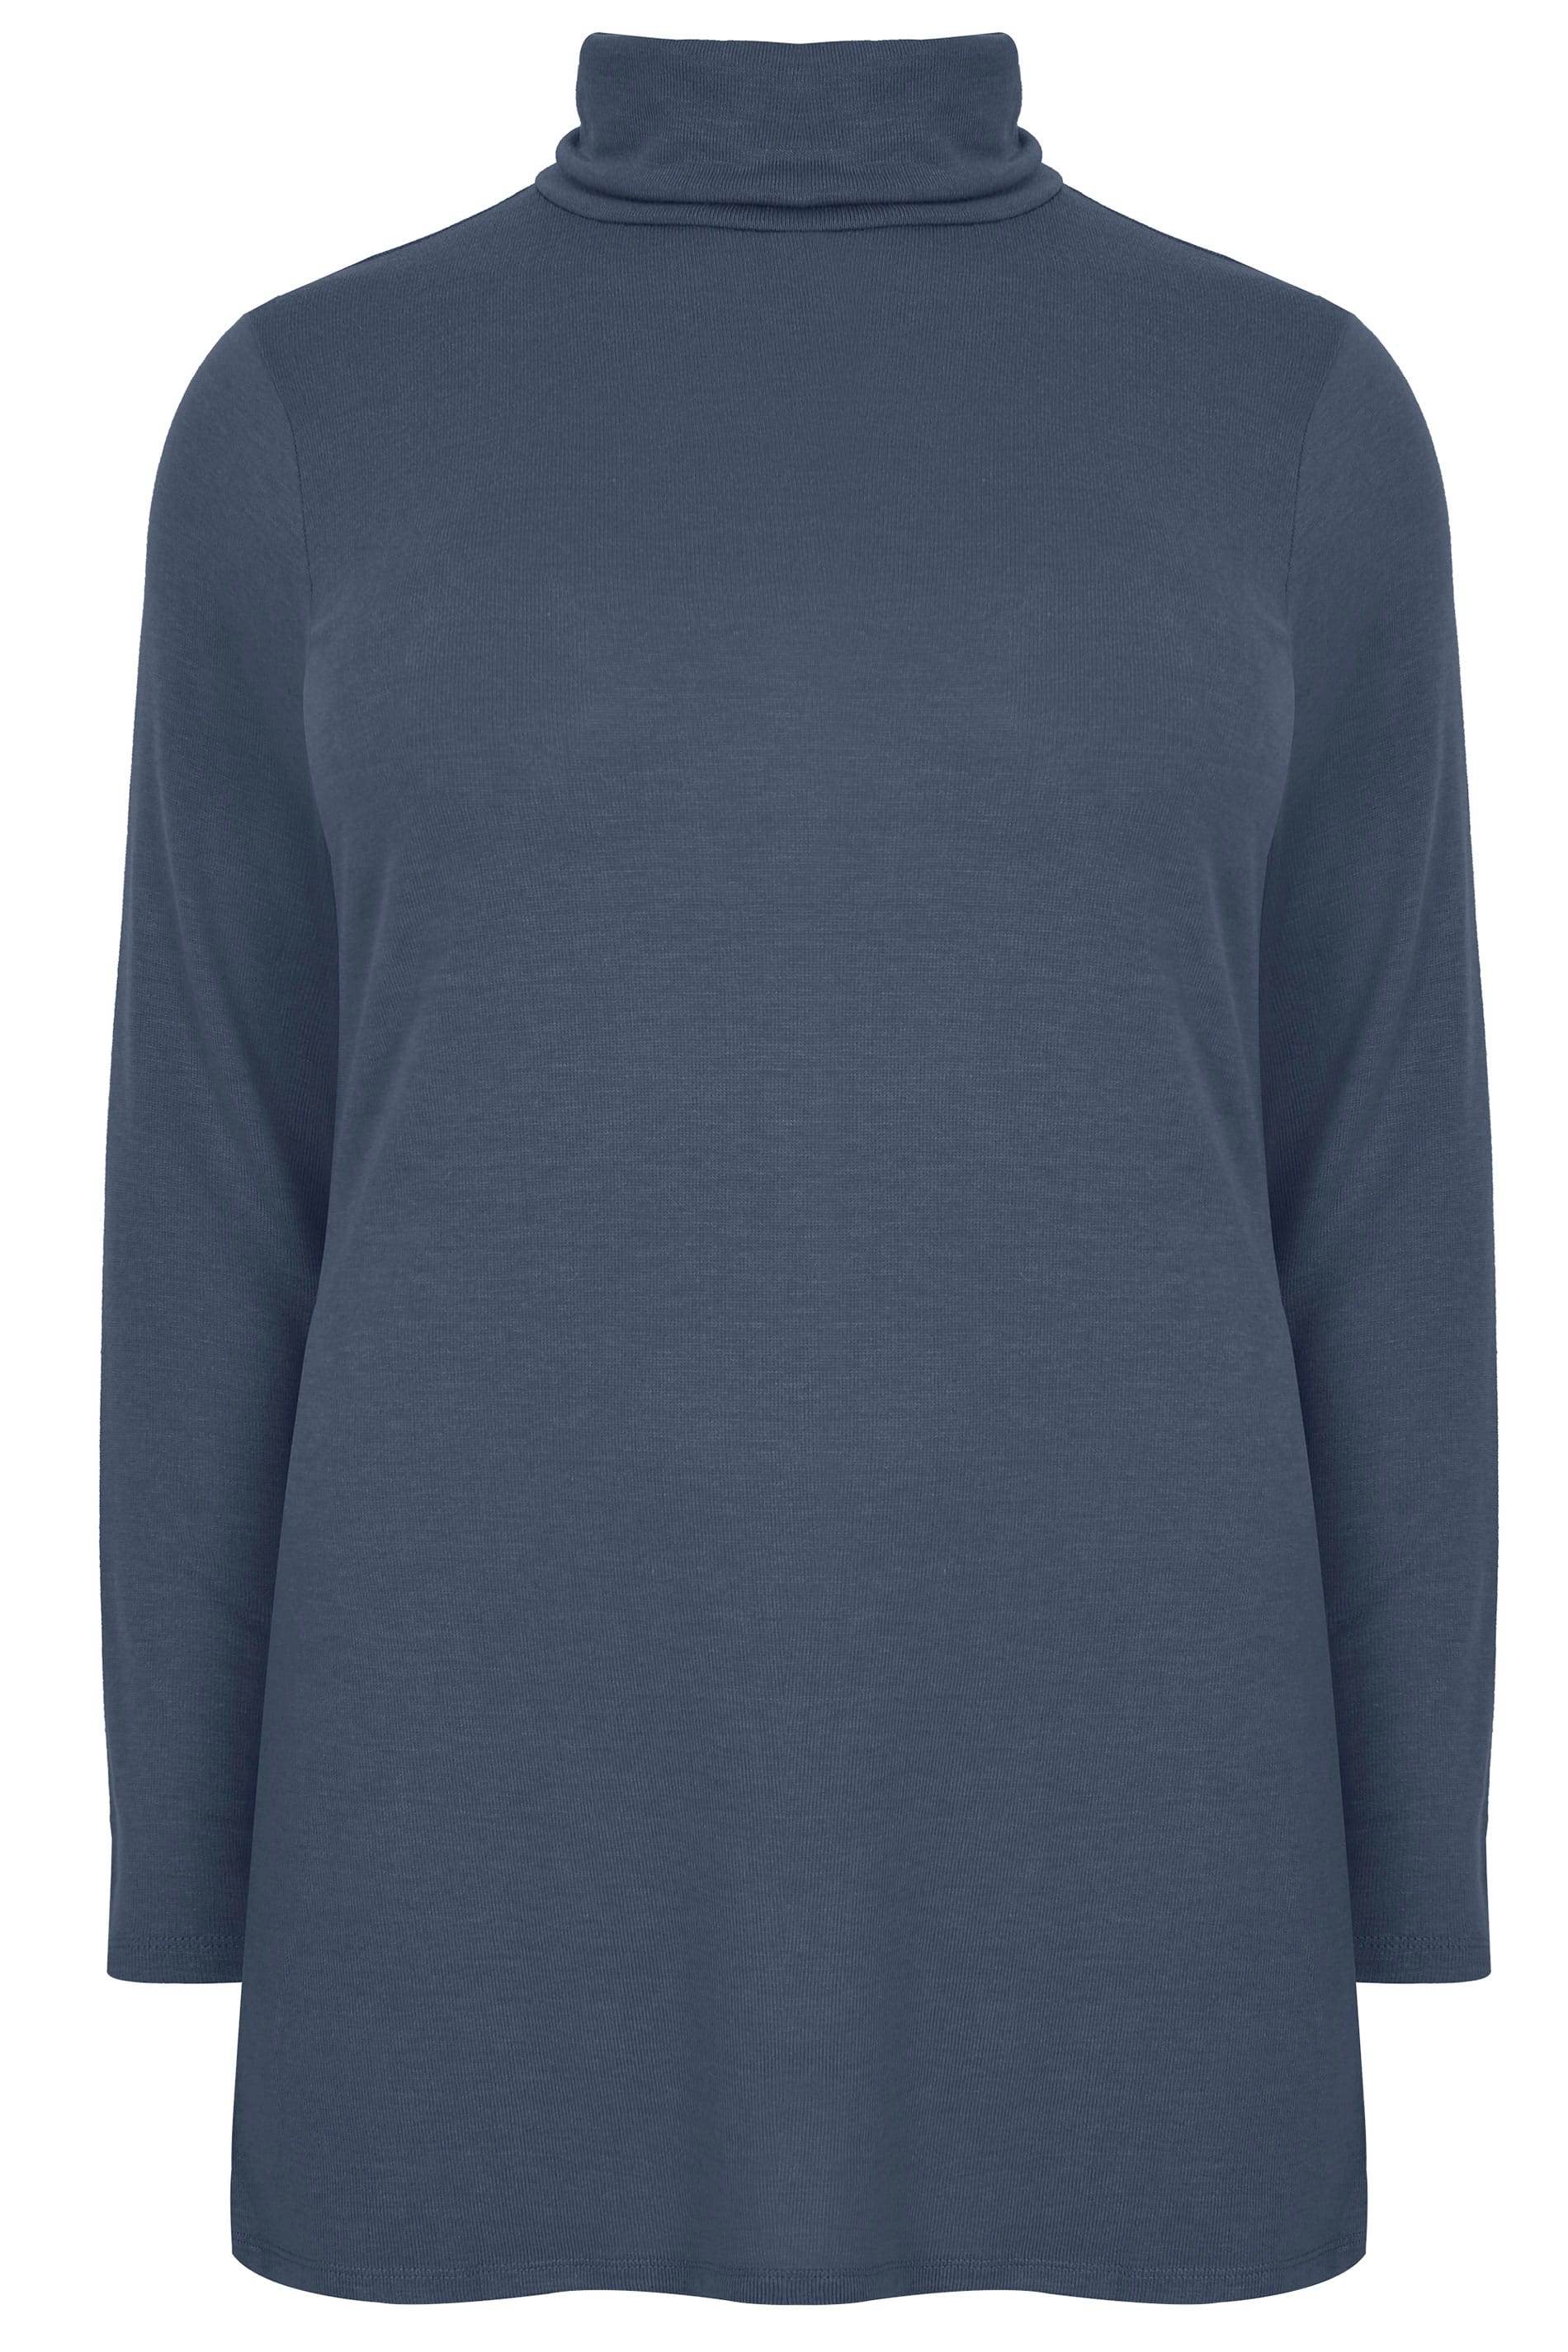 Plus Size Navy Turtleneck Swing Top | Sizes 16 to 36 | Yours Clothing